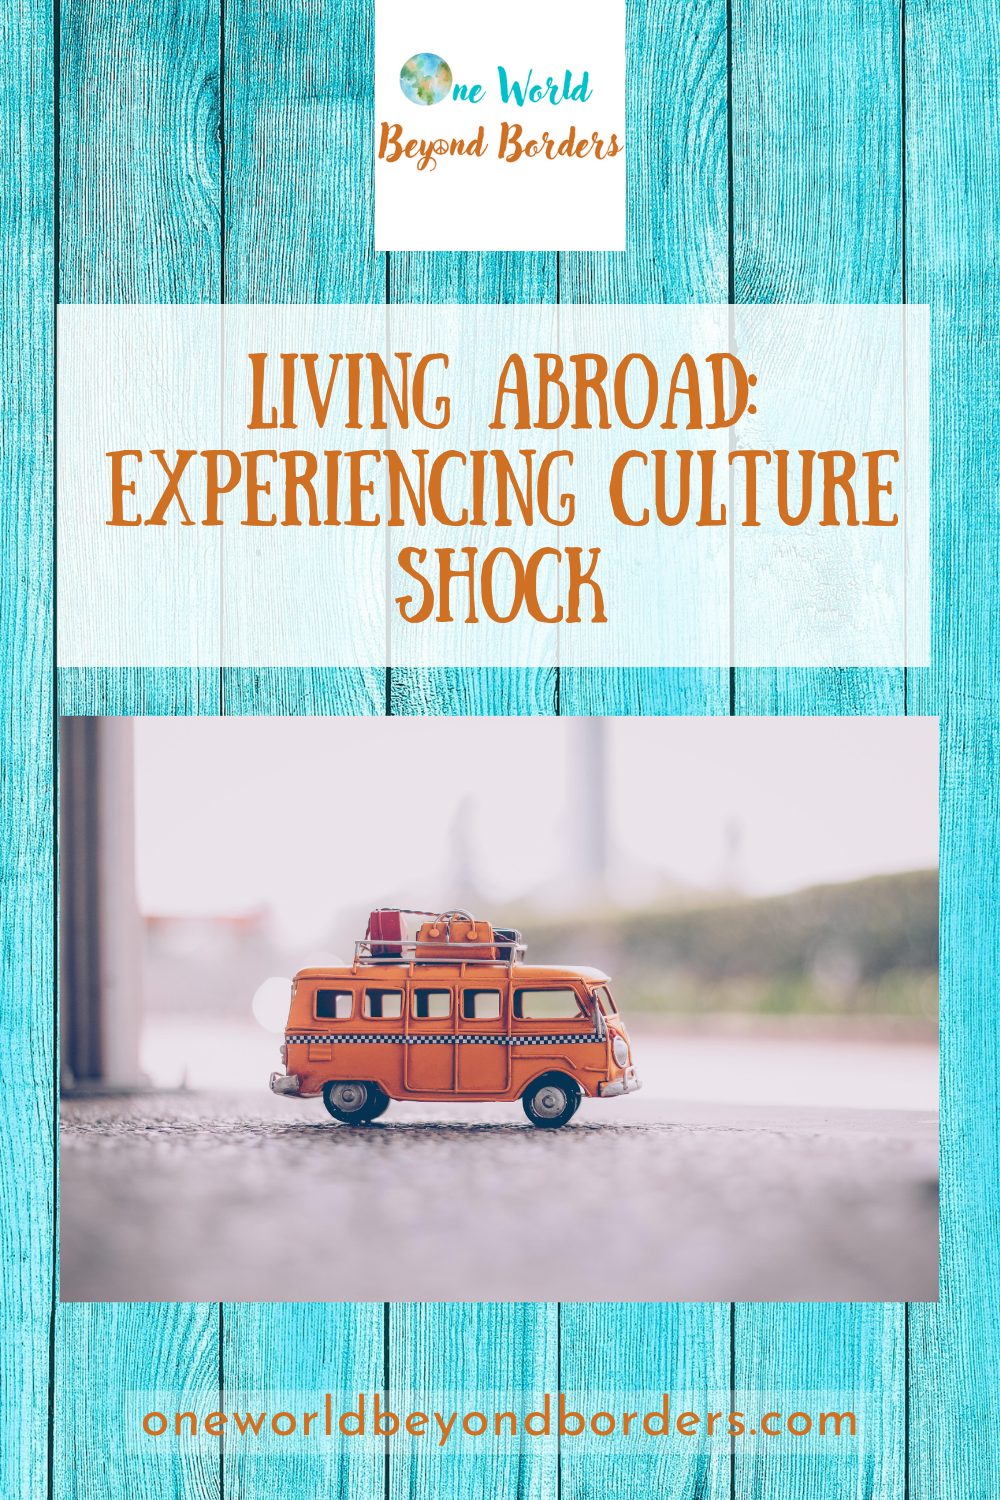 Living abroad culture shock - Pintrest pin